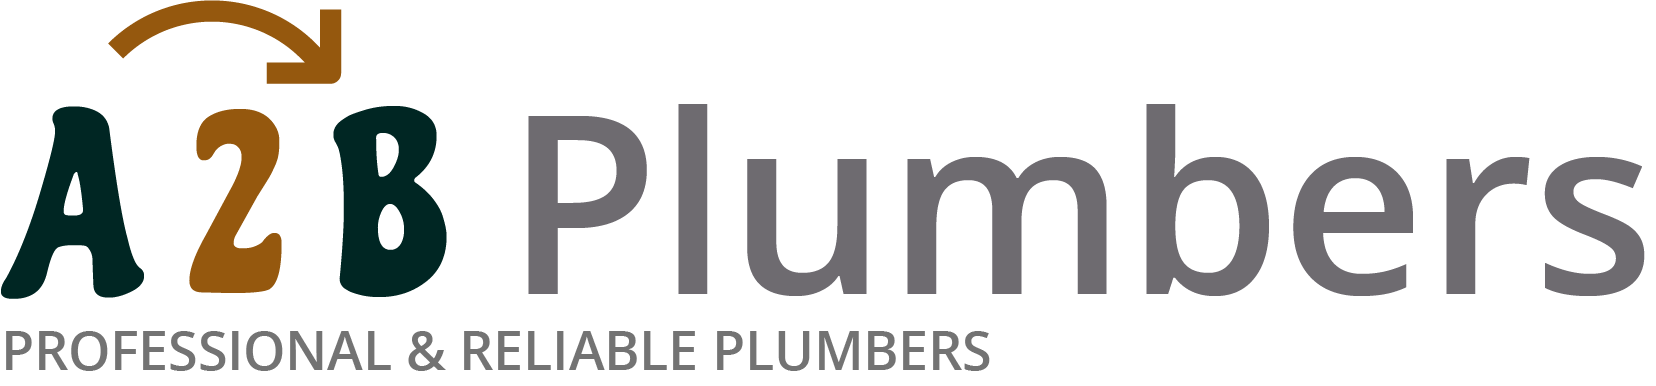 If you need a boiler installed, a radiator repaired or a leaking tap fixed, call us now - we provide services for properties in Putney and the local area.